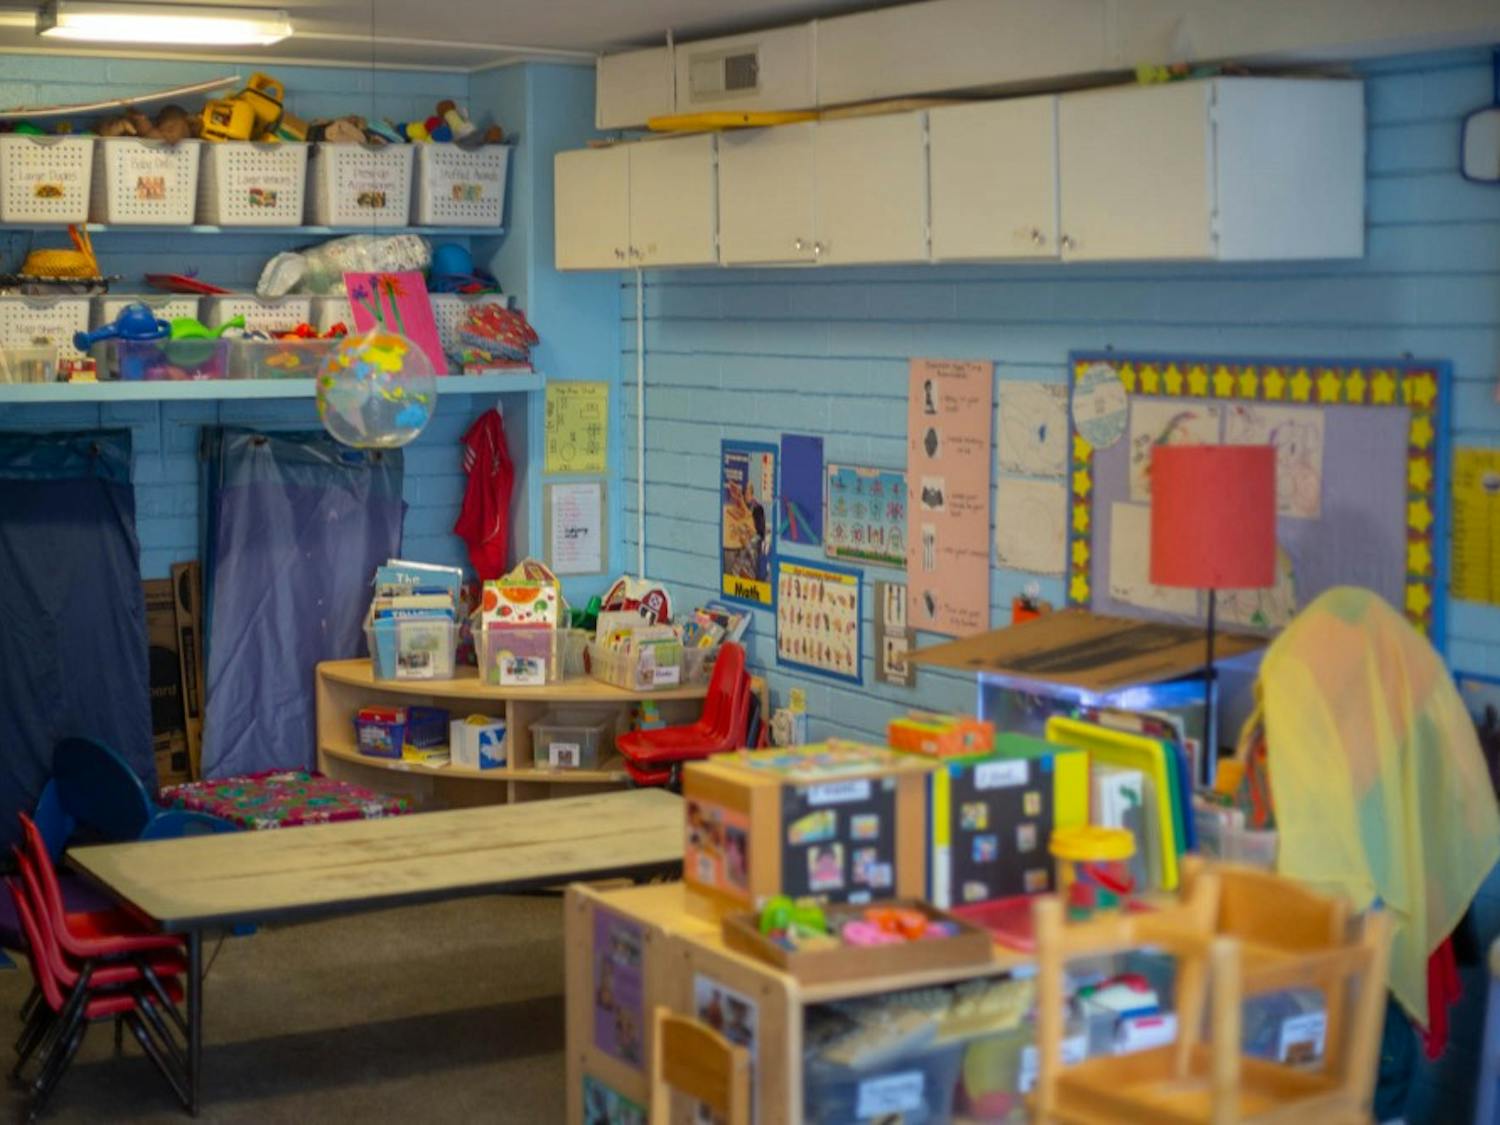 The 'Blue Room' is one of several classrooms at the Chapel Hill Cooperative Preschool where teaches and staff work to aid students in their development and prepare them for entry into the secondary school system. The Cooperative Preschool system also finalized plans to consolidate their two Chapel Hill sites into a single facility on Monday, April 1, 2019.